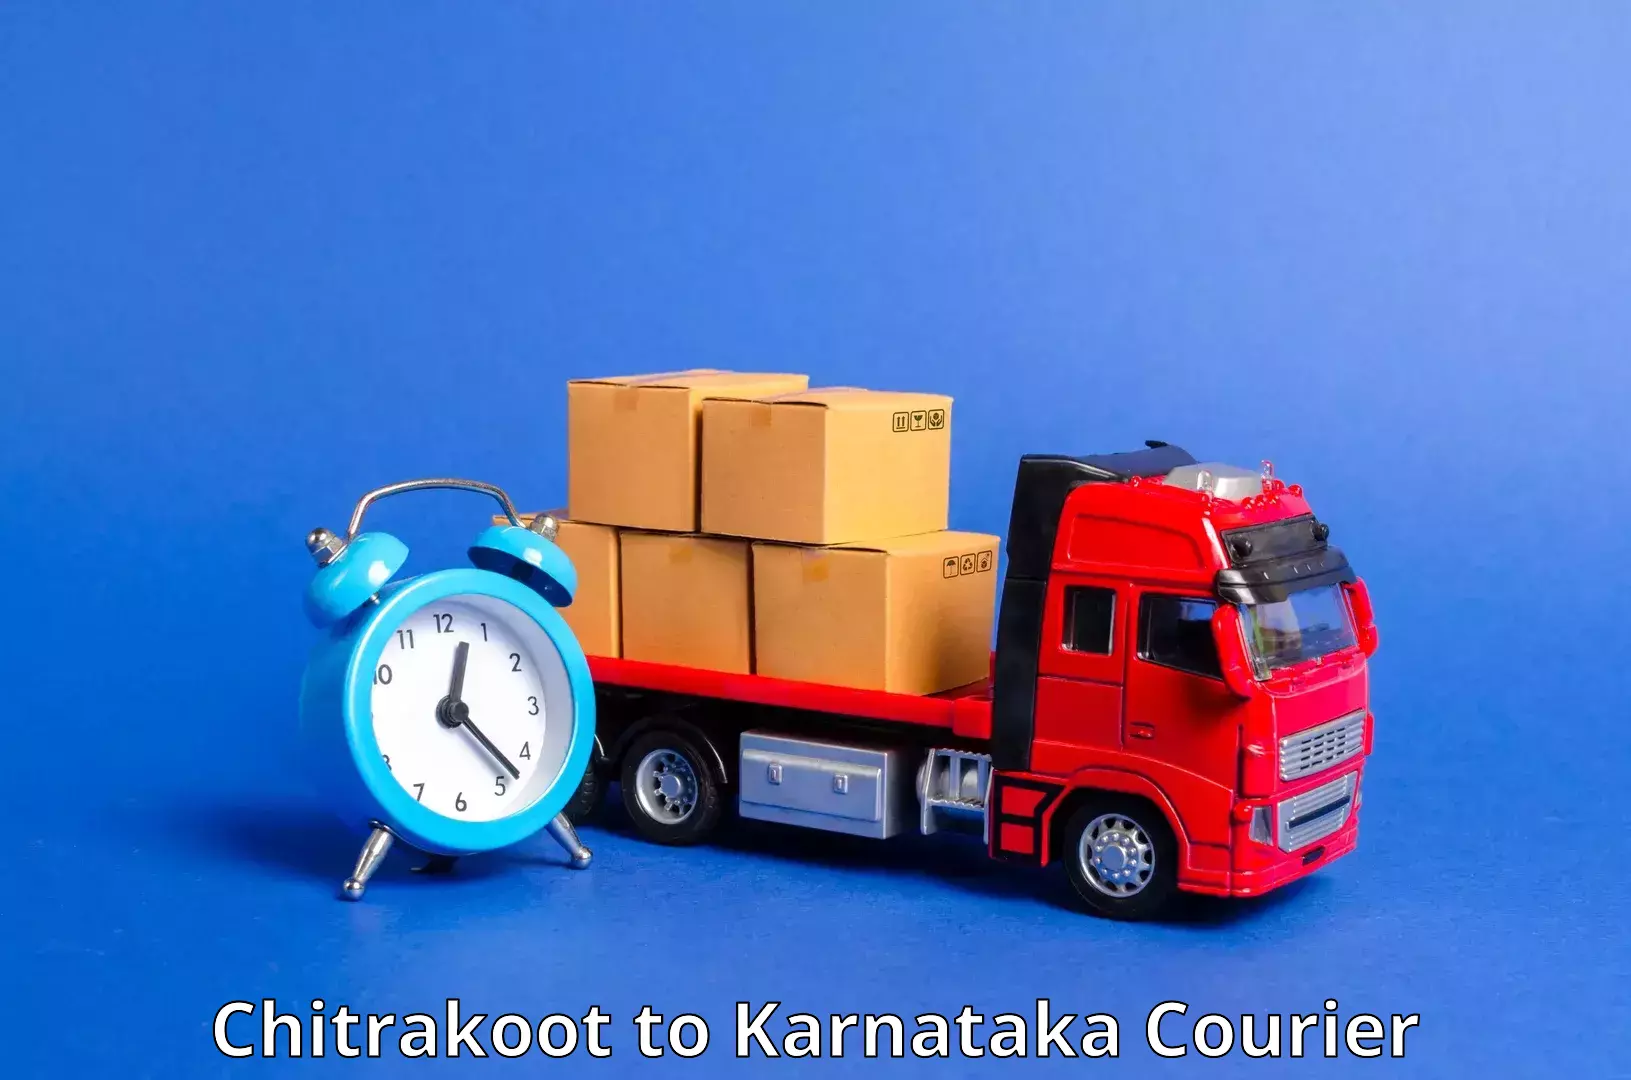 Reliable delivery network Chitrakoot to Srinivaspur